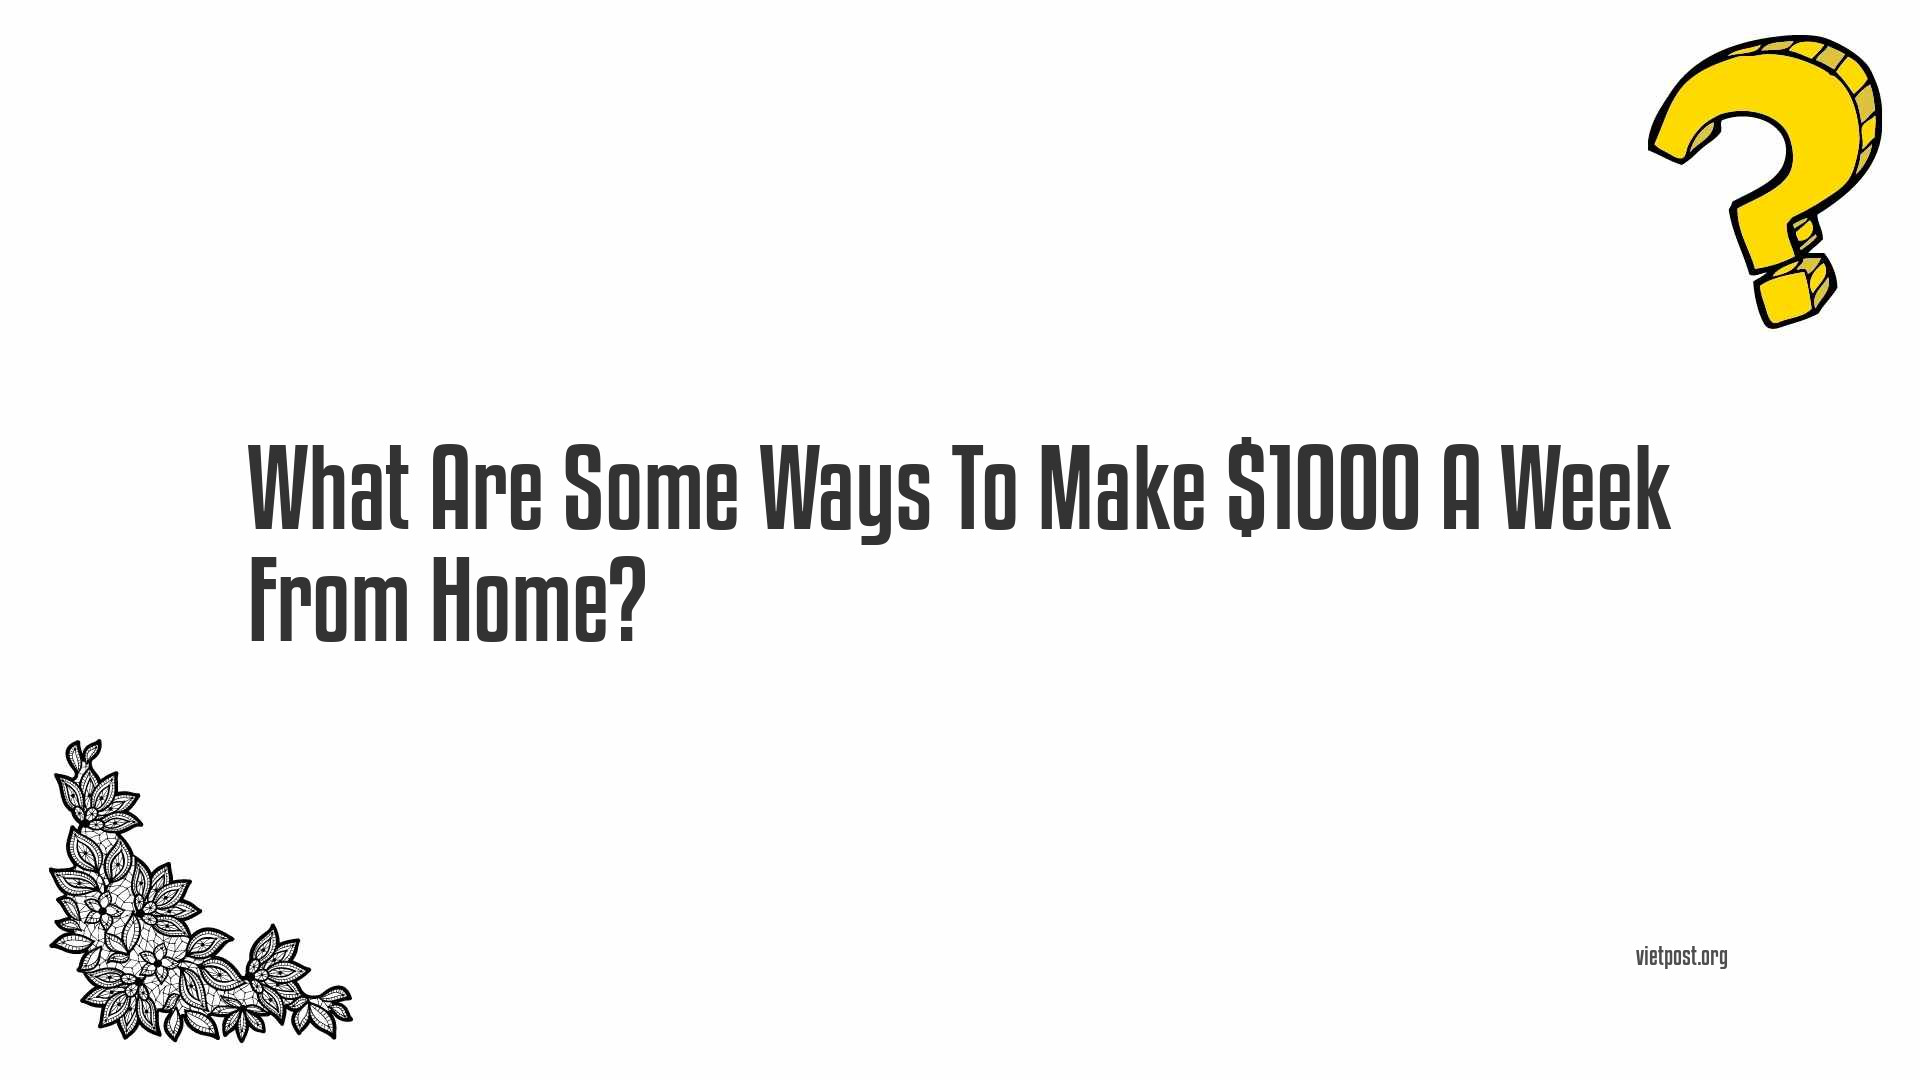 What Are Some Ways To Make $1000 A Week From Home?